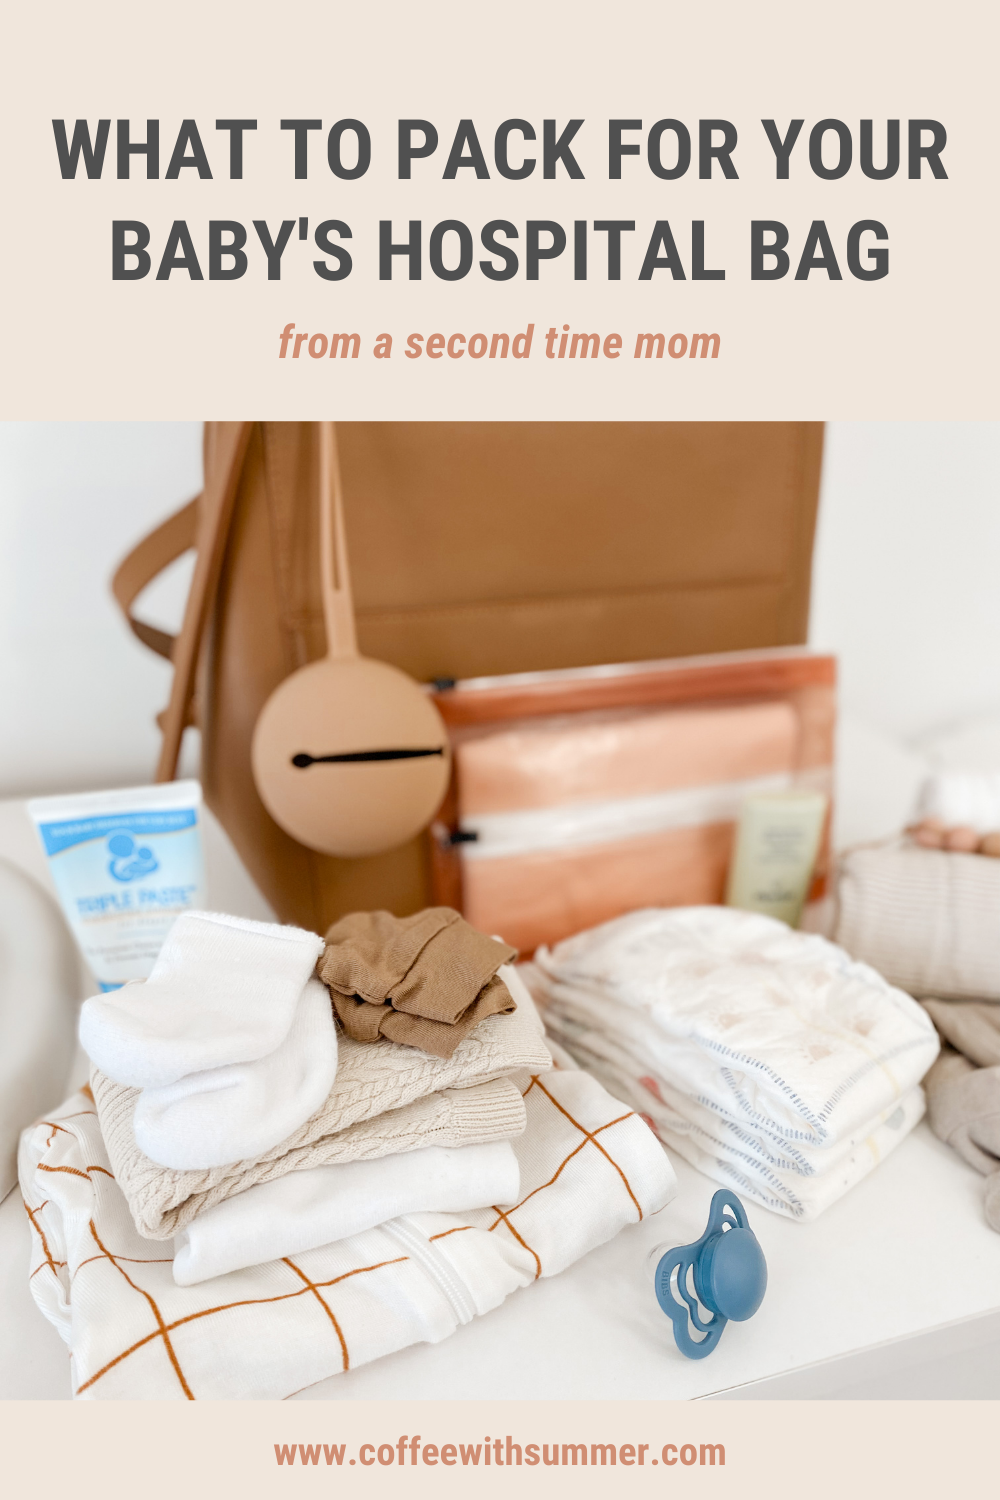 Top Essentials For Your Baby For Your Hospital Bag - Coffee With Summer